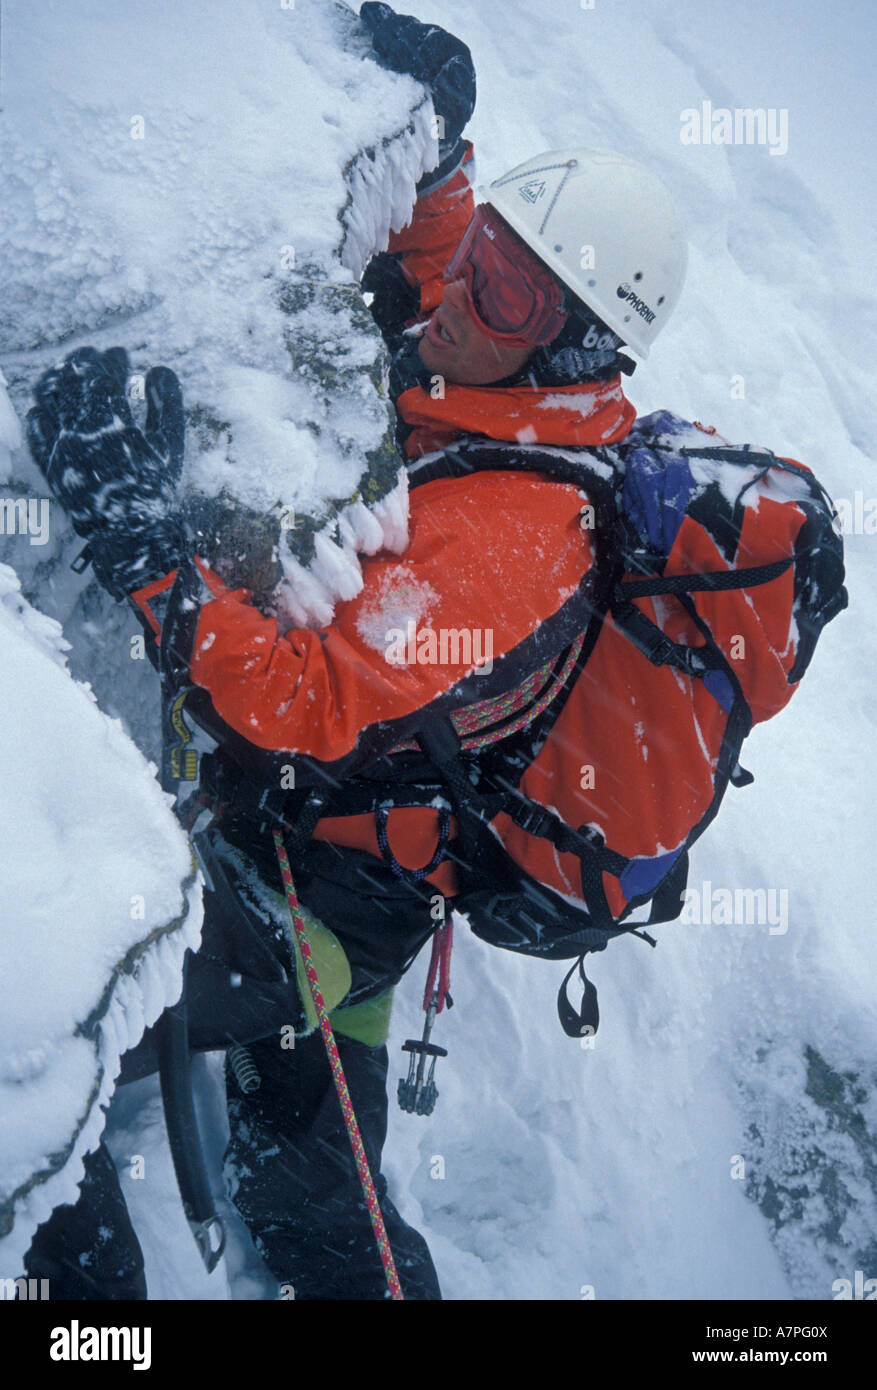 III. Essential Gear and Equipment for Climbing in Adverse Weather Conditions